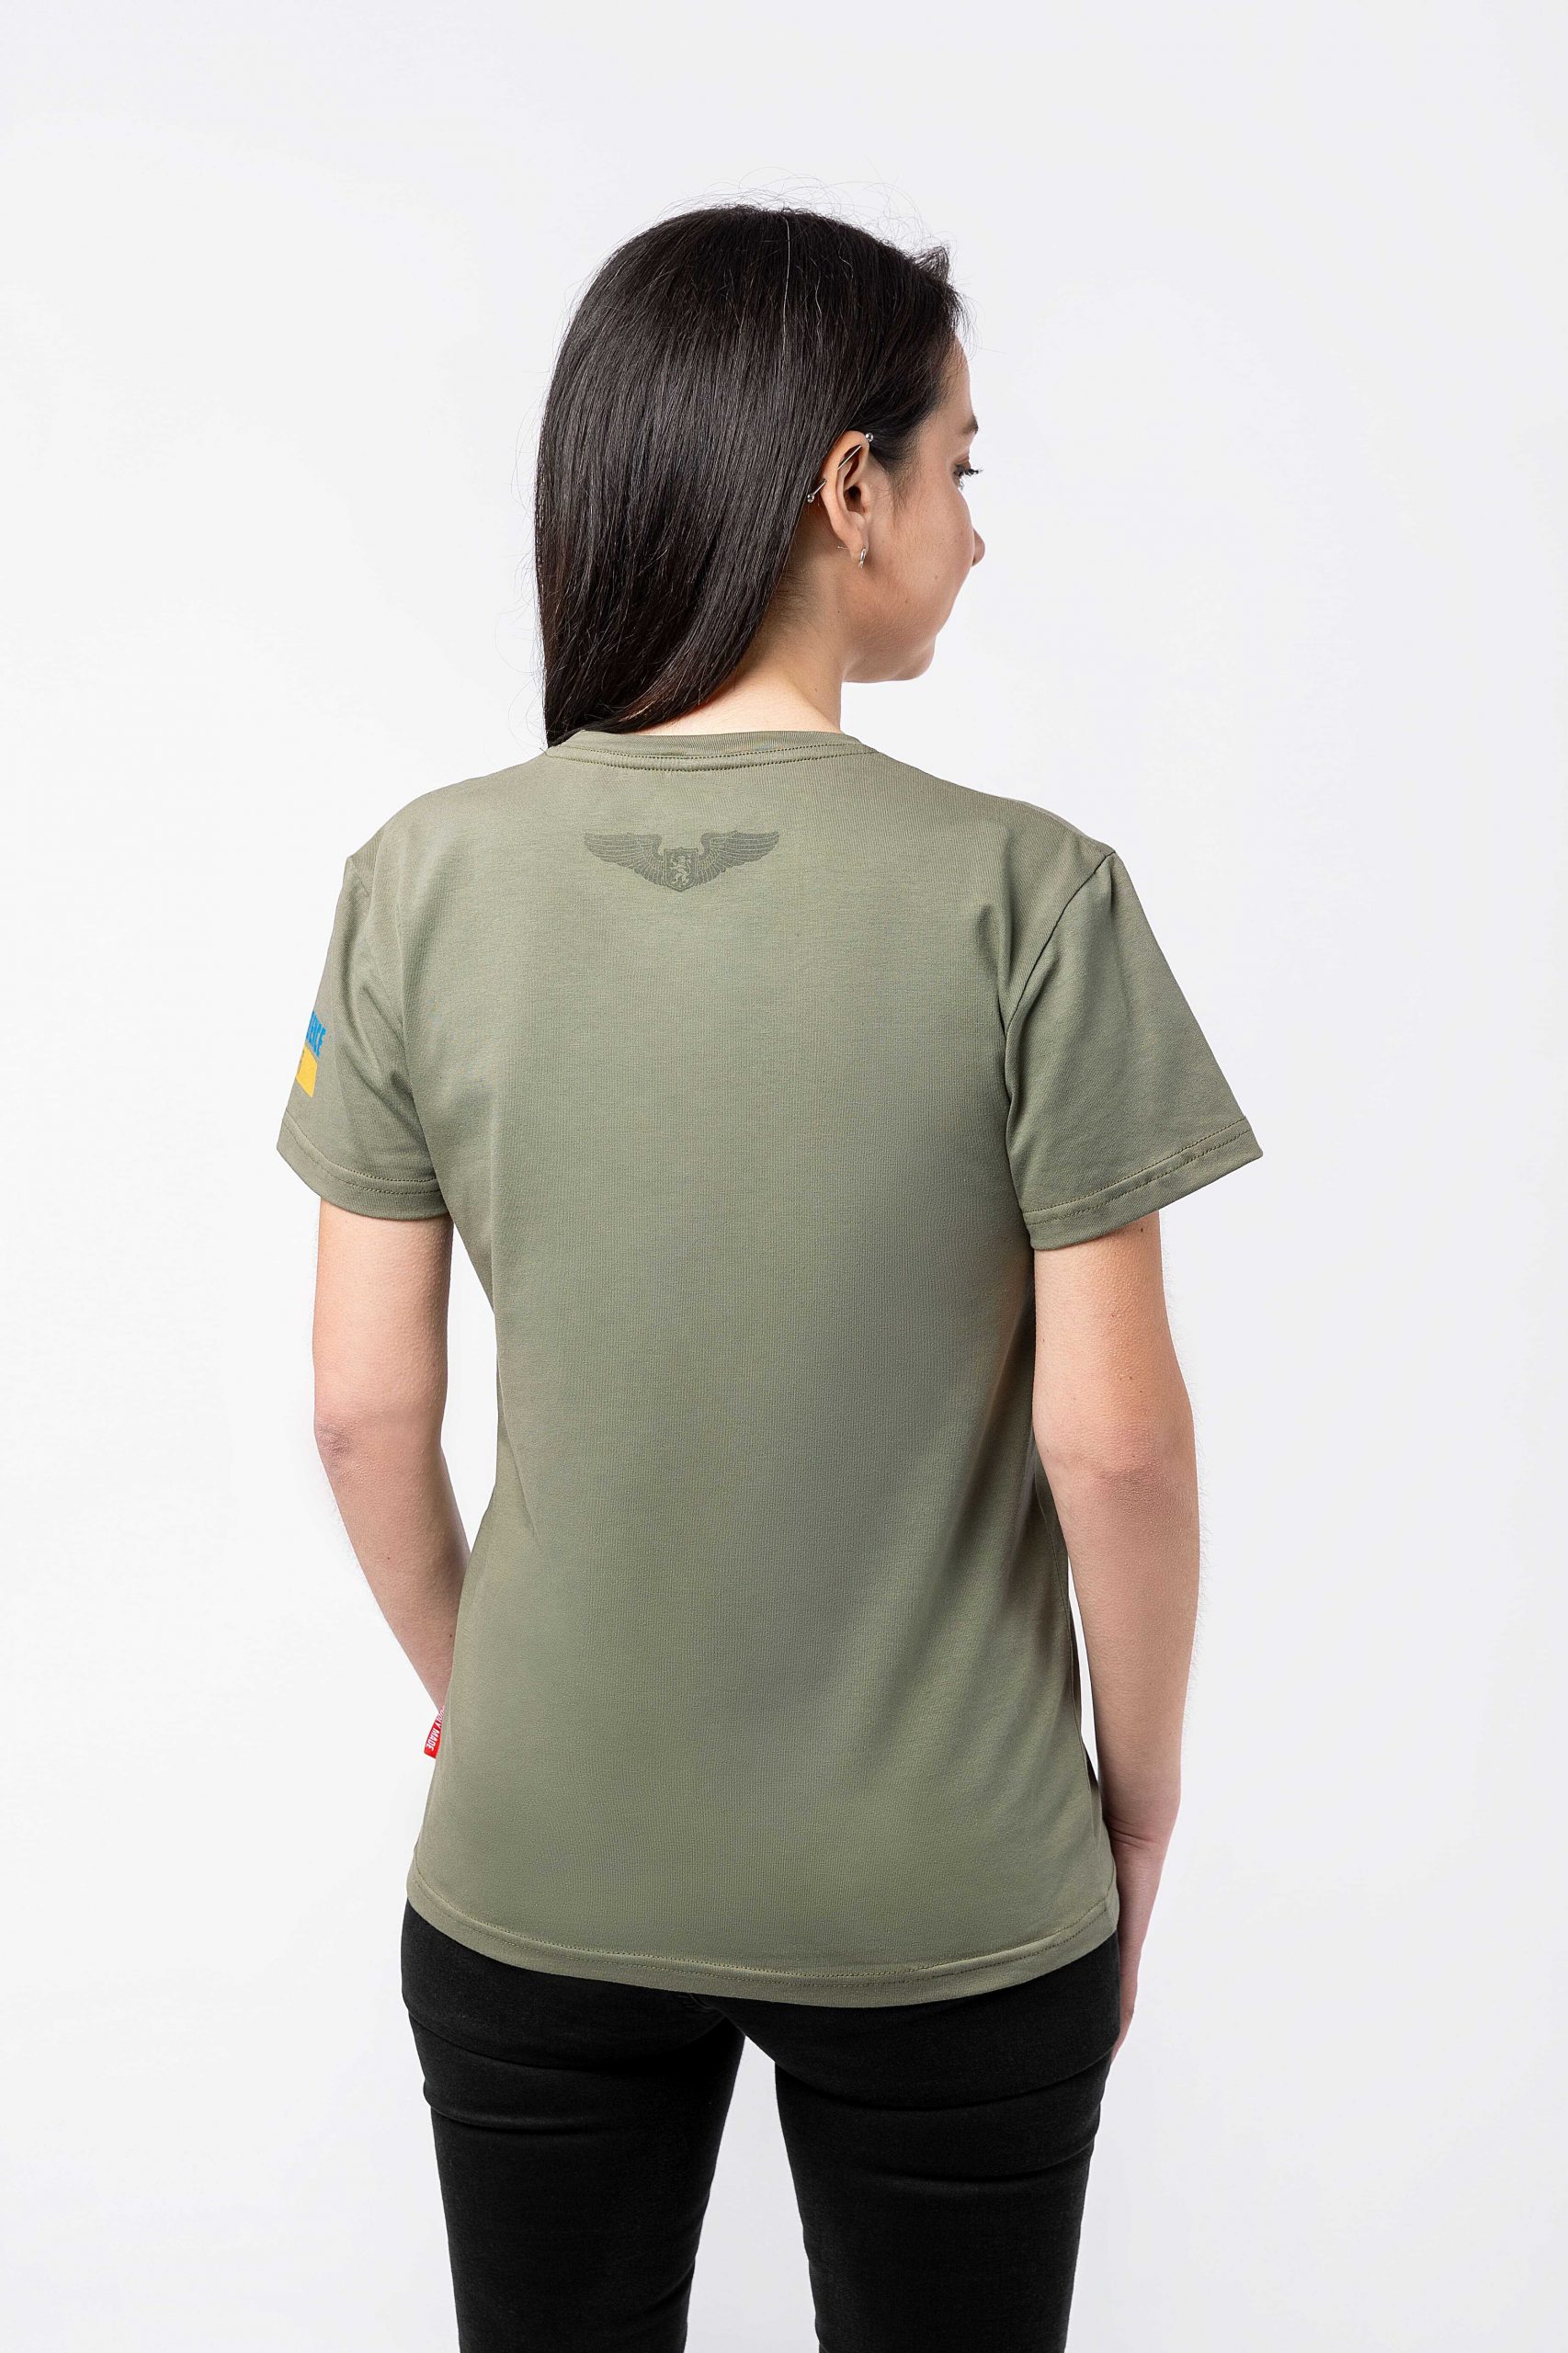 Women's T-Shirt We Are From Ukraine.h. Color khaki. 1.